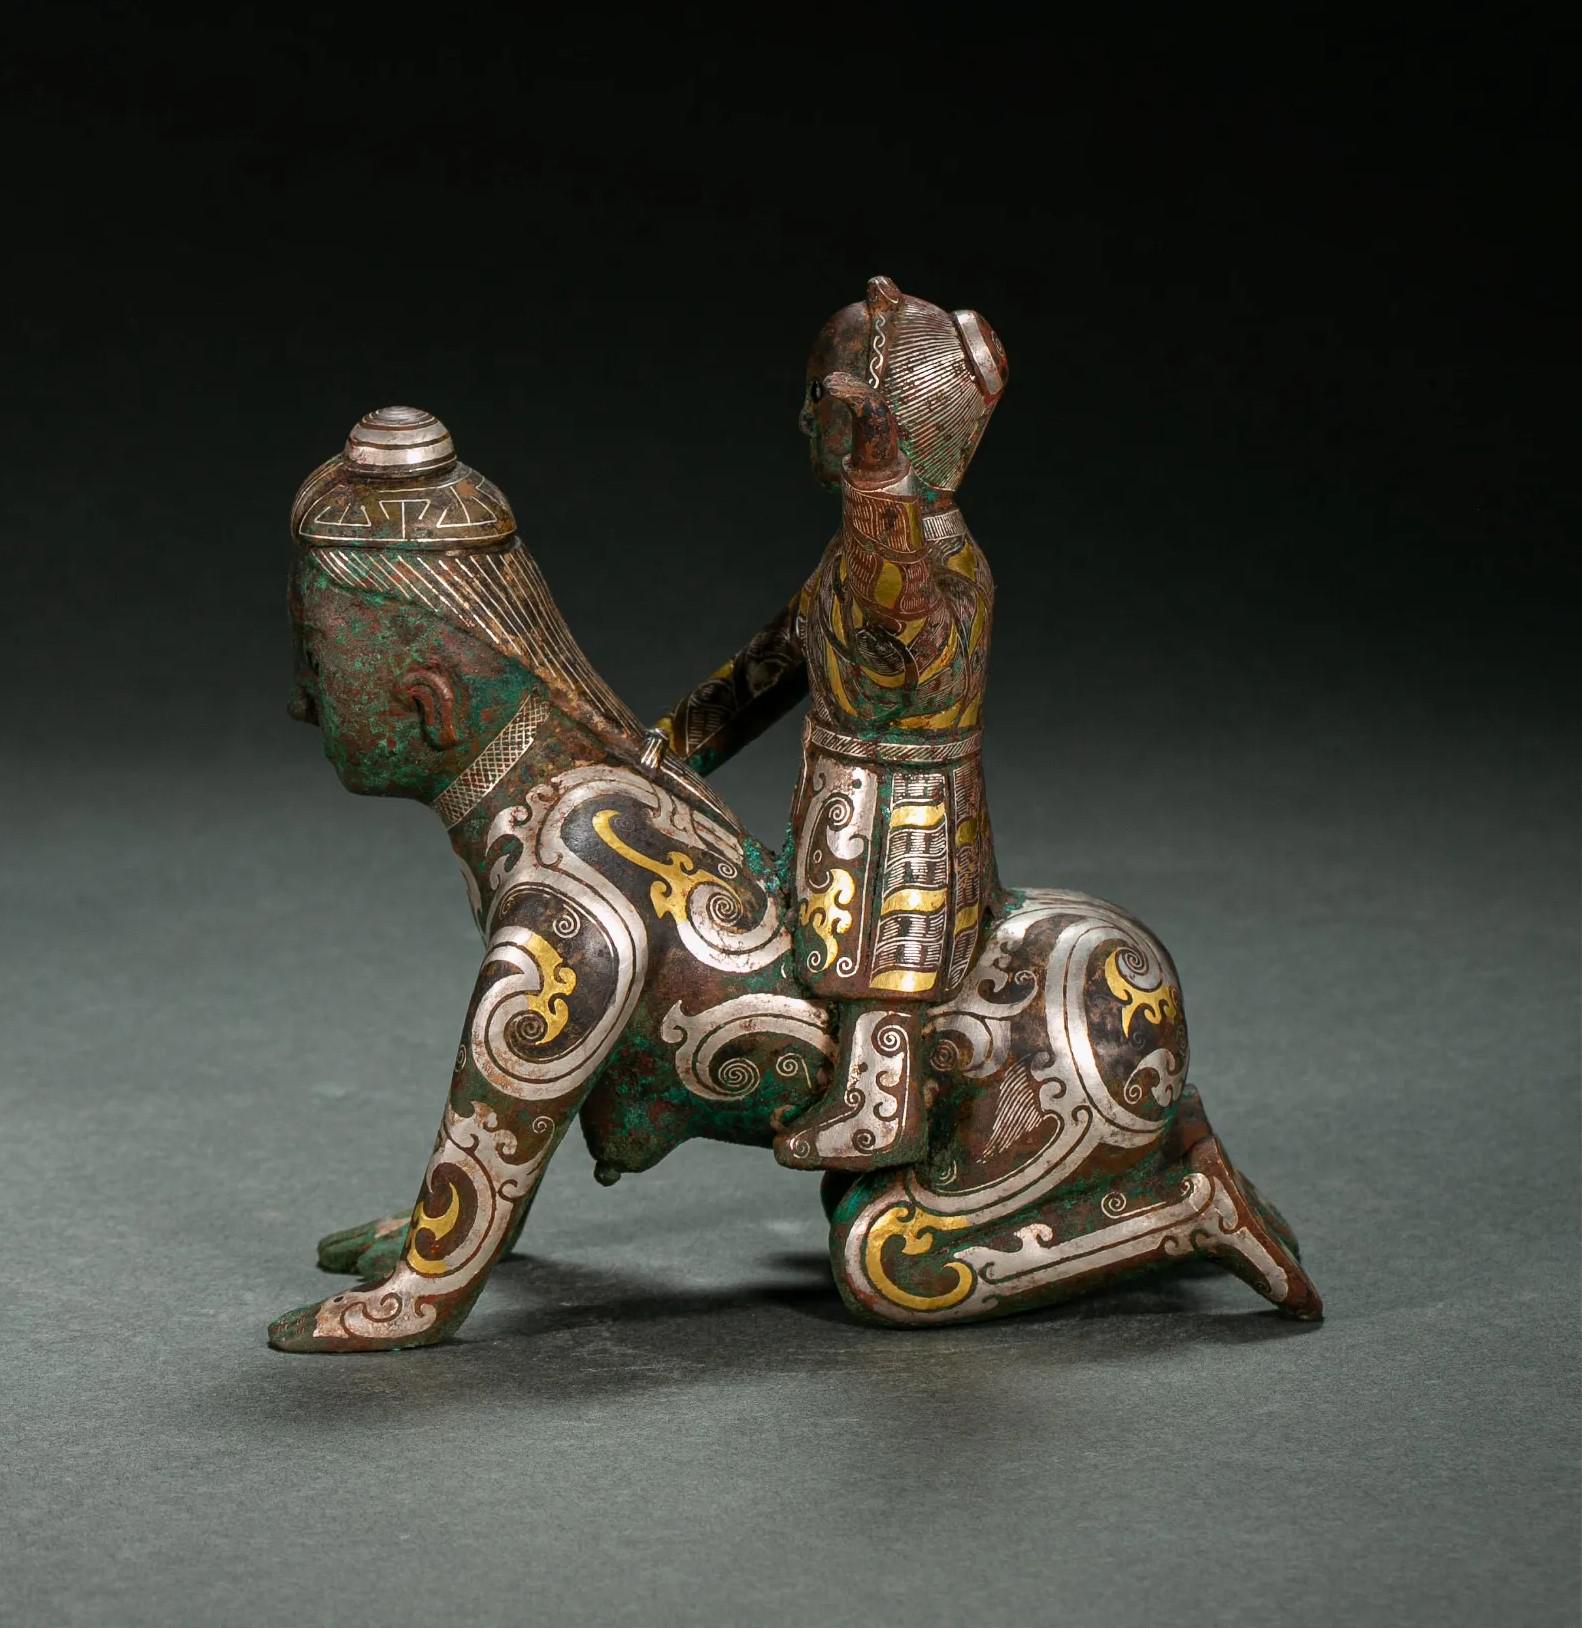 Chinese gold and silver inlaid bronze figures, Han dynasty (202 BC – 220 AD).jpg